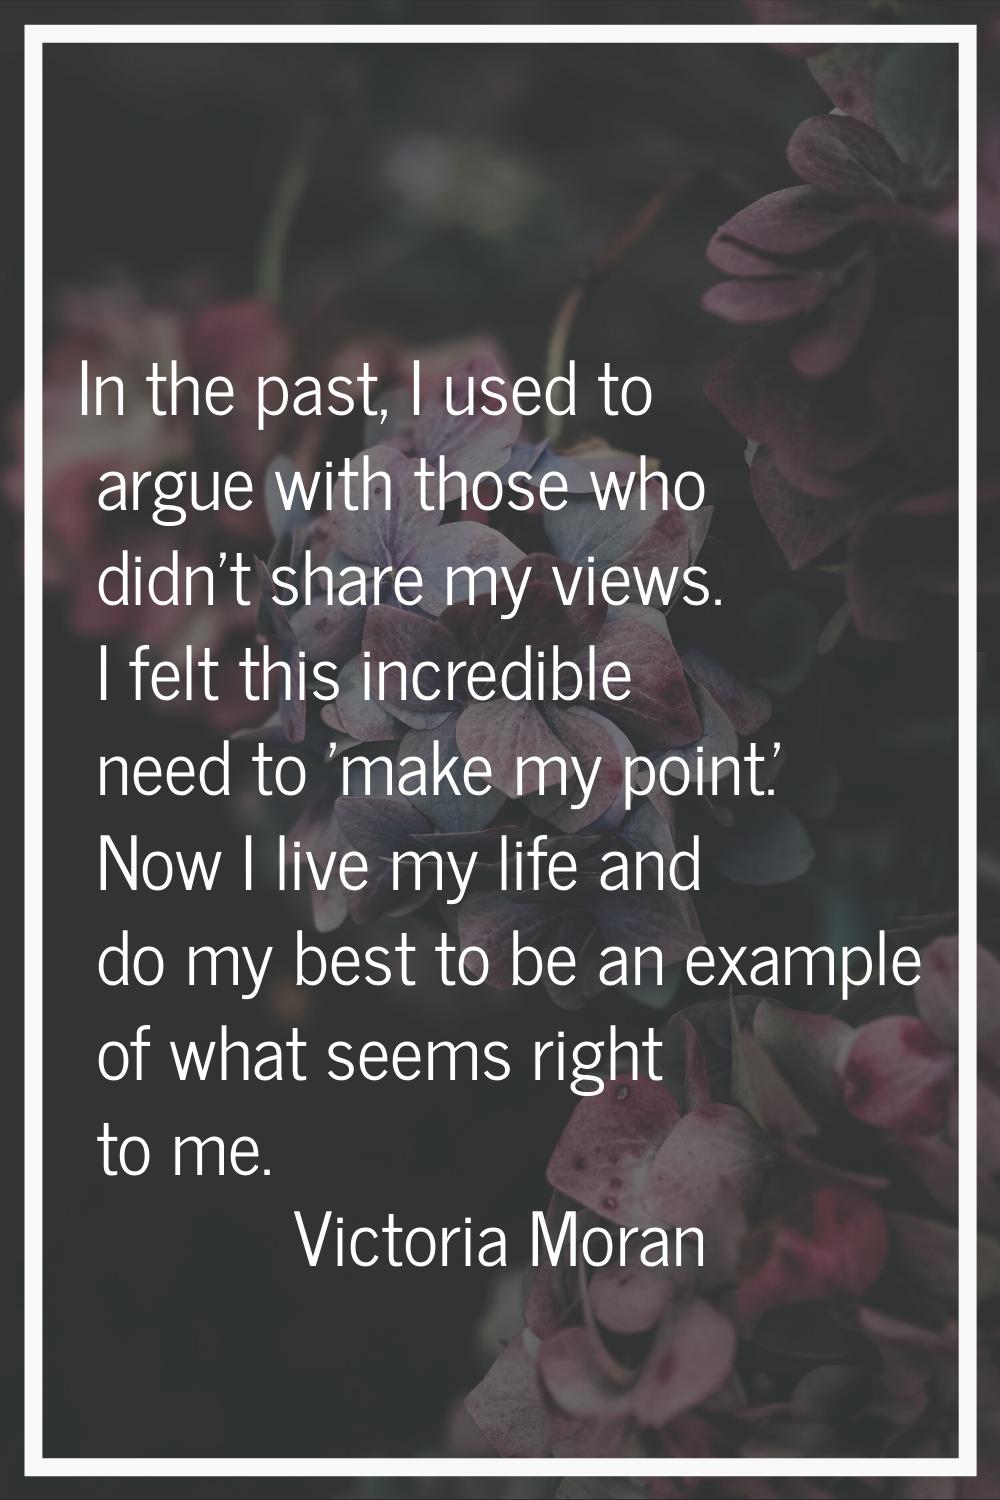 In the past, I used to argue with those who didn't share my views. I felt this incredible need to '